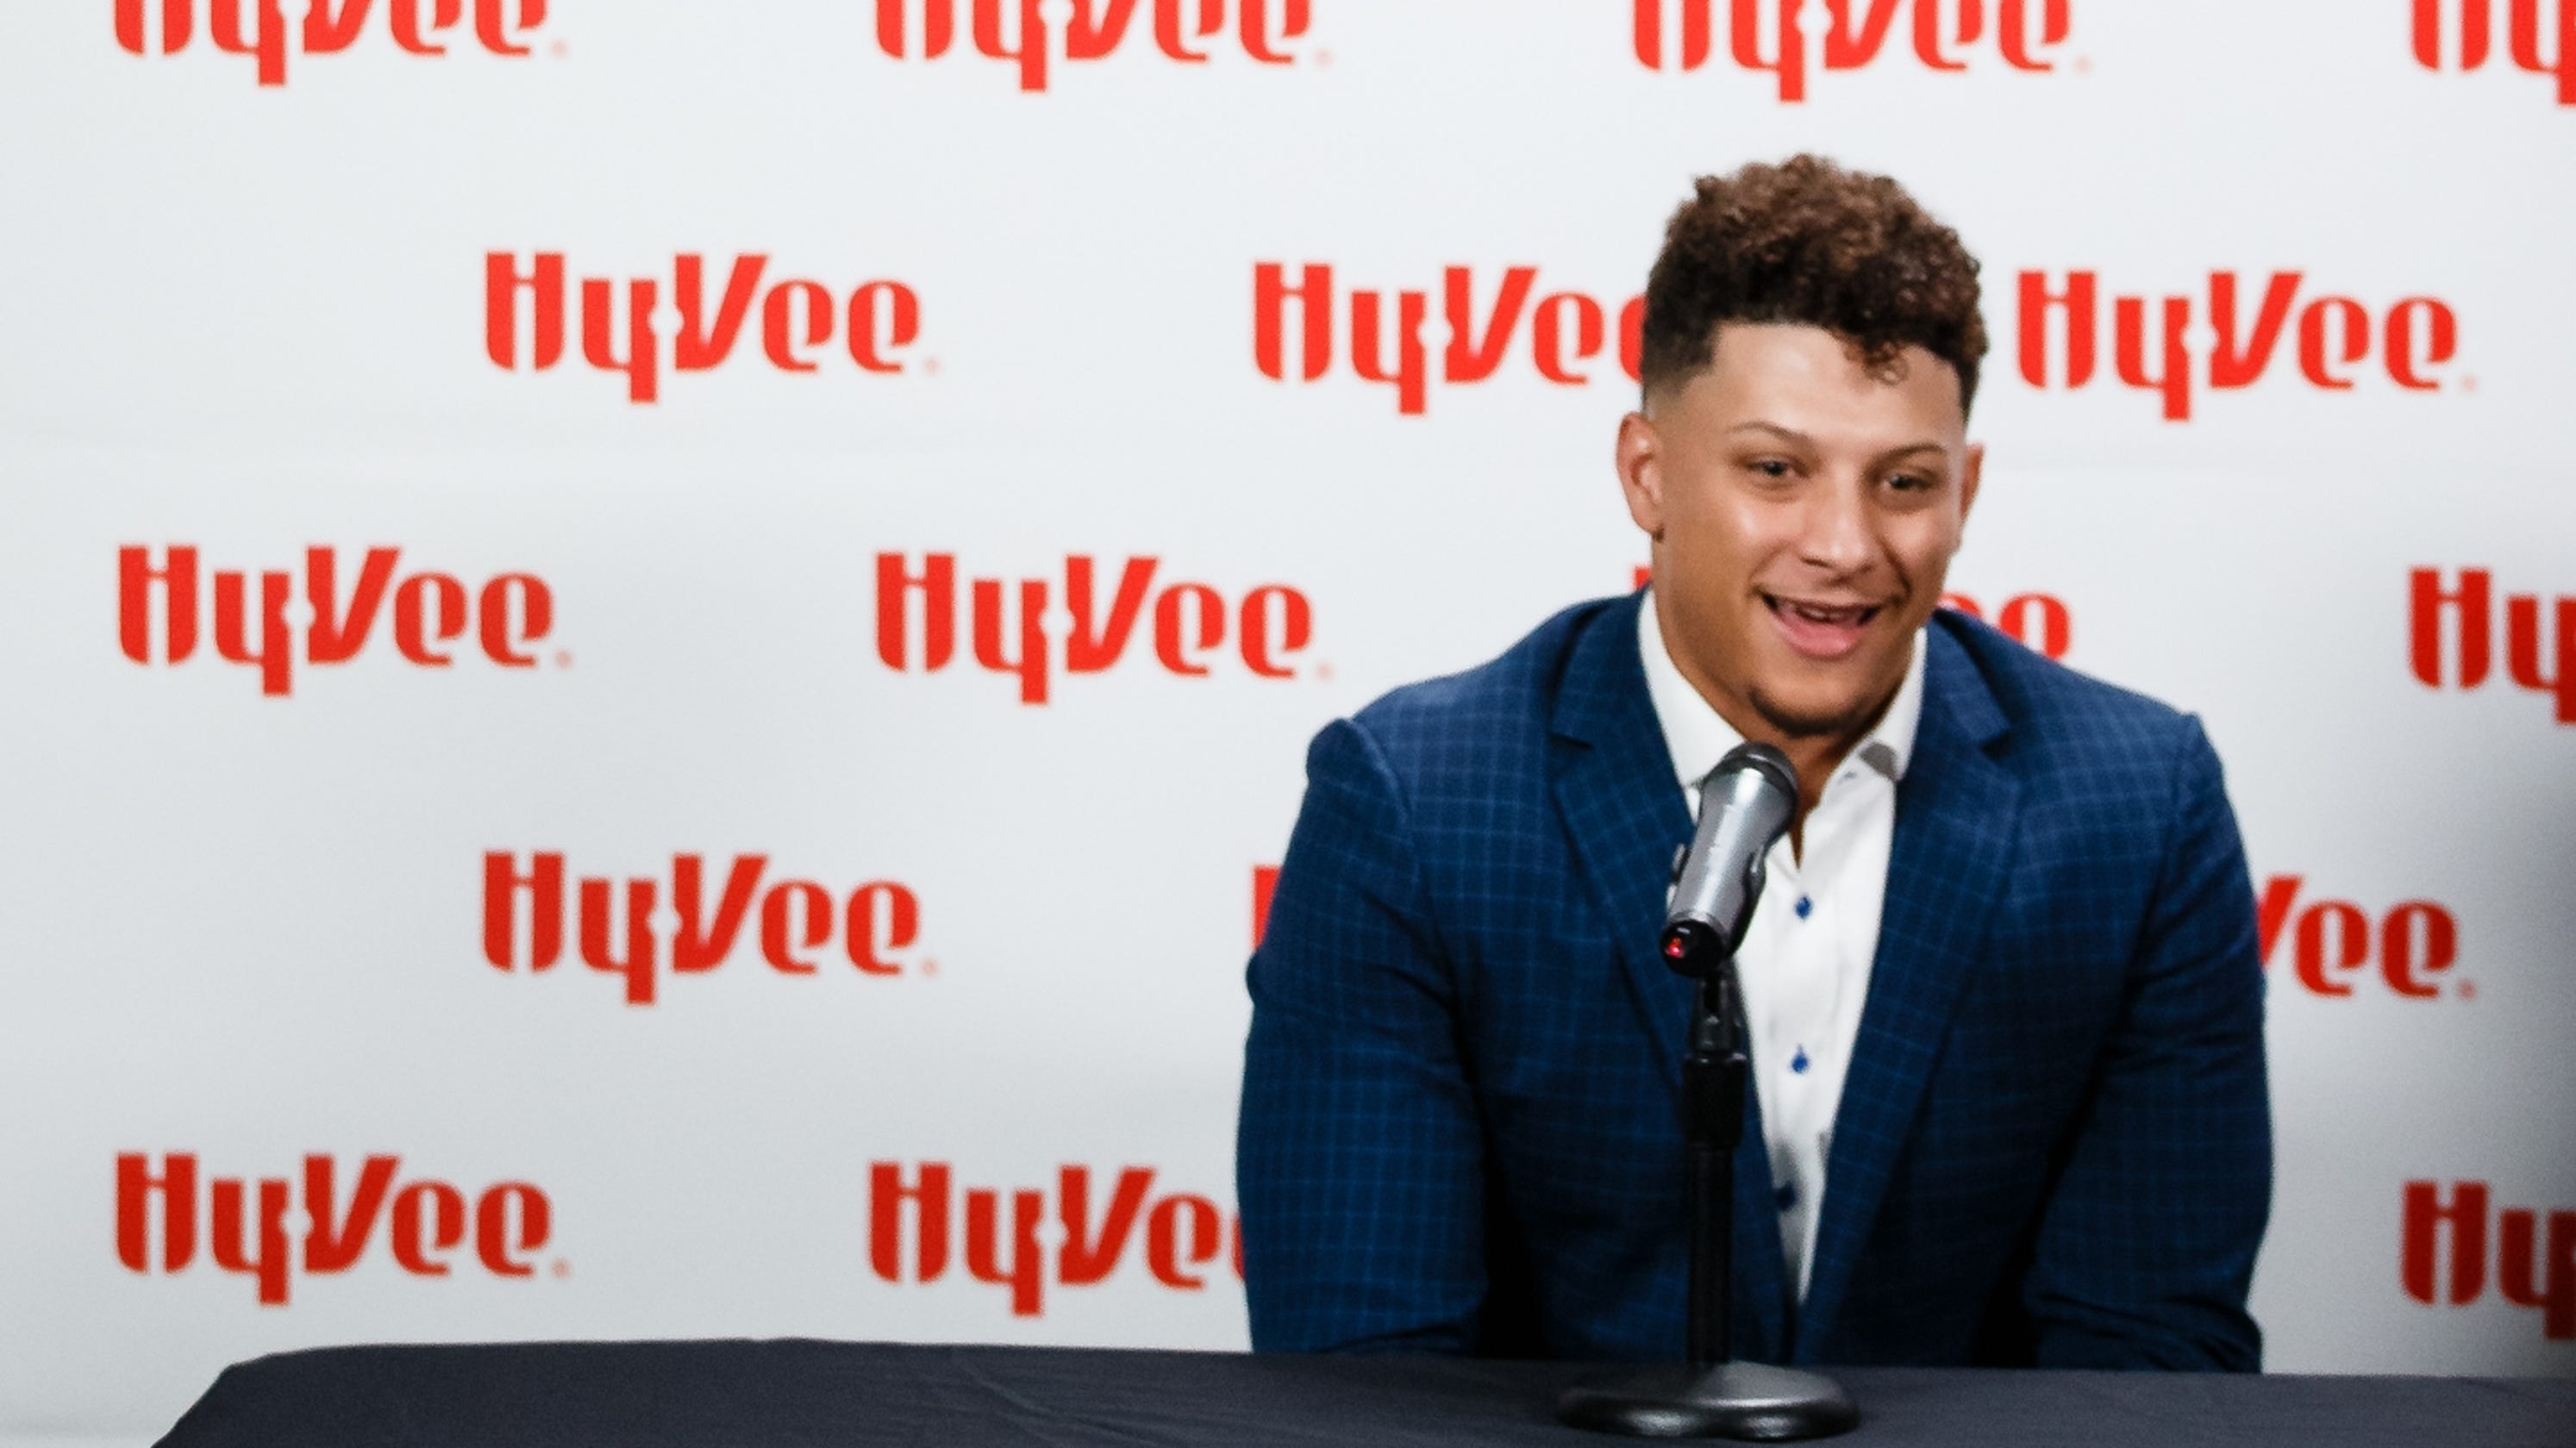 Hy-Vee turns to celebrity influencers like Patrick Mahomes to reach millennials2988 x 1680